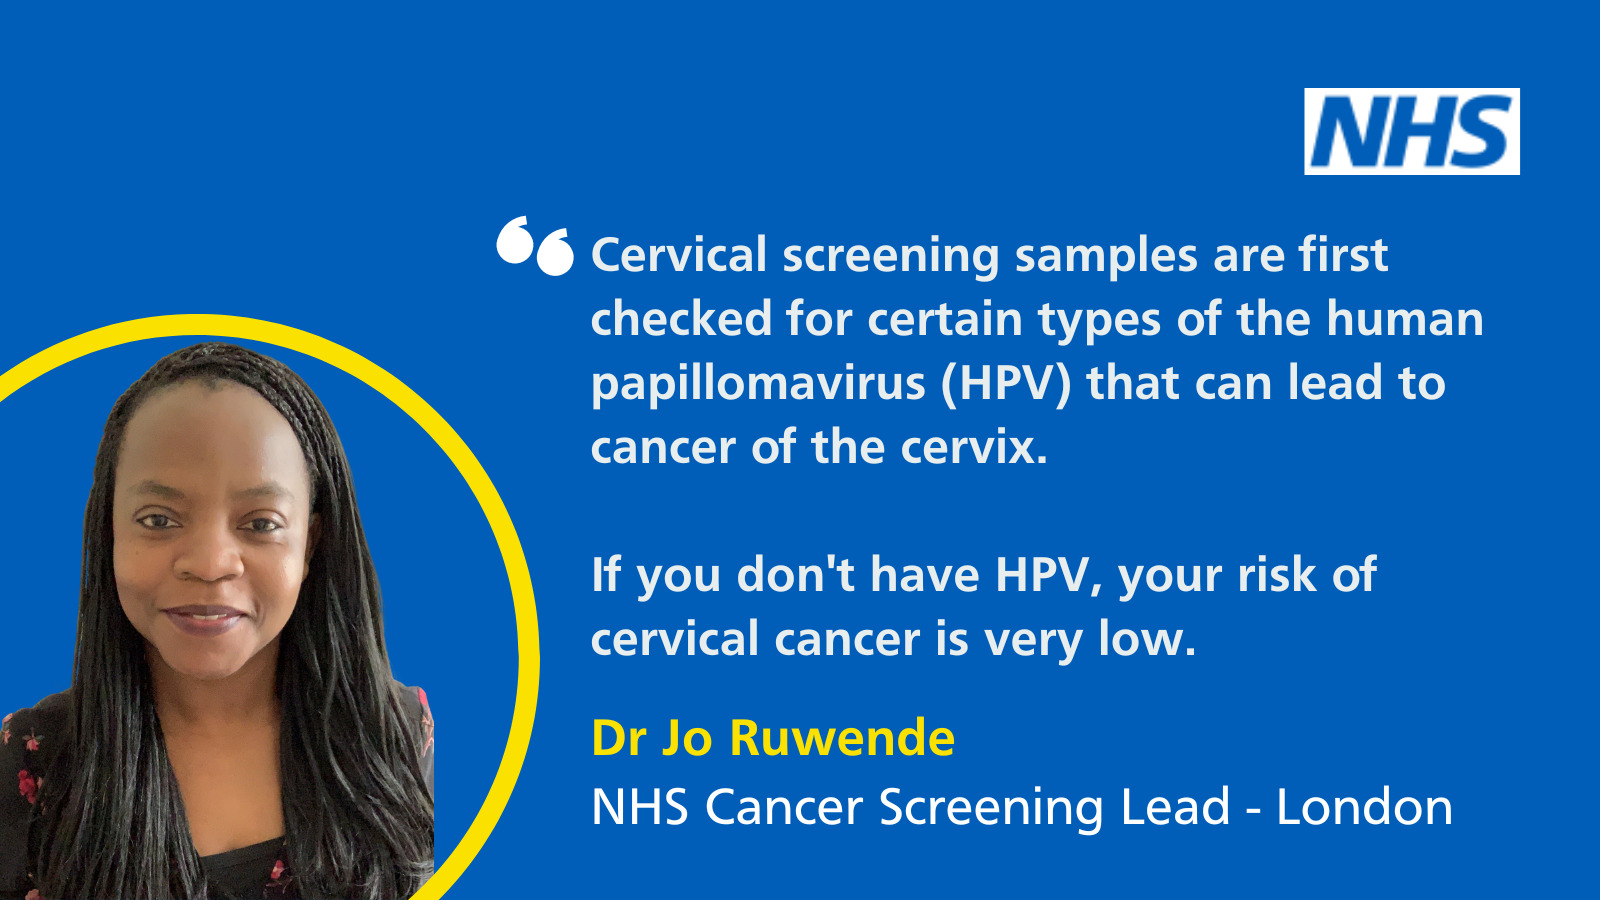 Headshot of Dr Jo Ruwende (NHS Cancer Screening Lead- London). Beside, text reads: 'Cervical screening samples are first checked for certain types of the human papillomavirus (HPV) that can lead to cancer of the cervix. If you don't have HPV, your risk of cervical cancer is very low.'